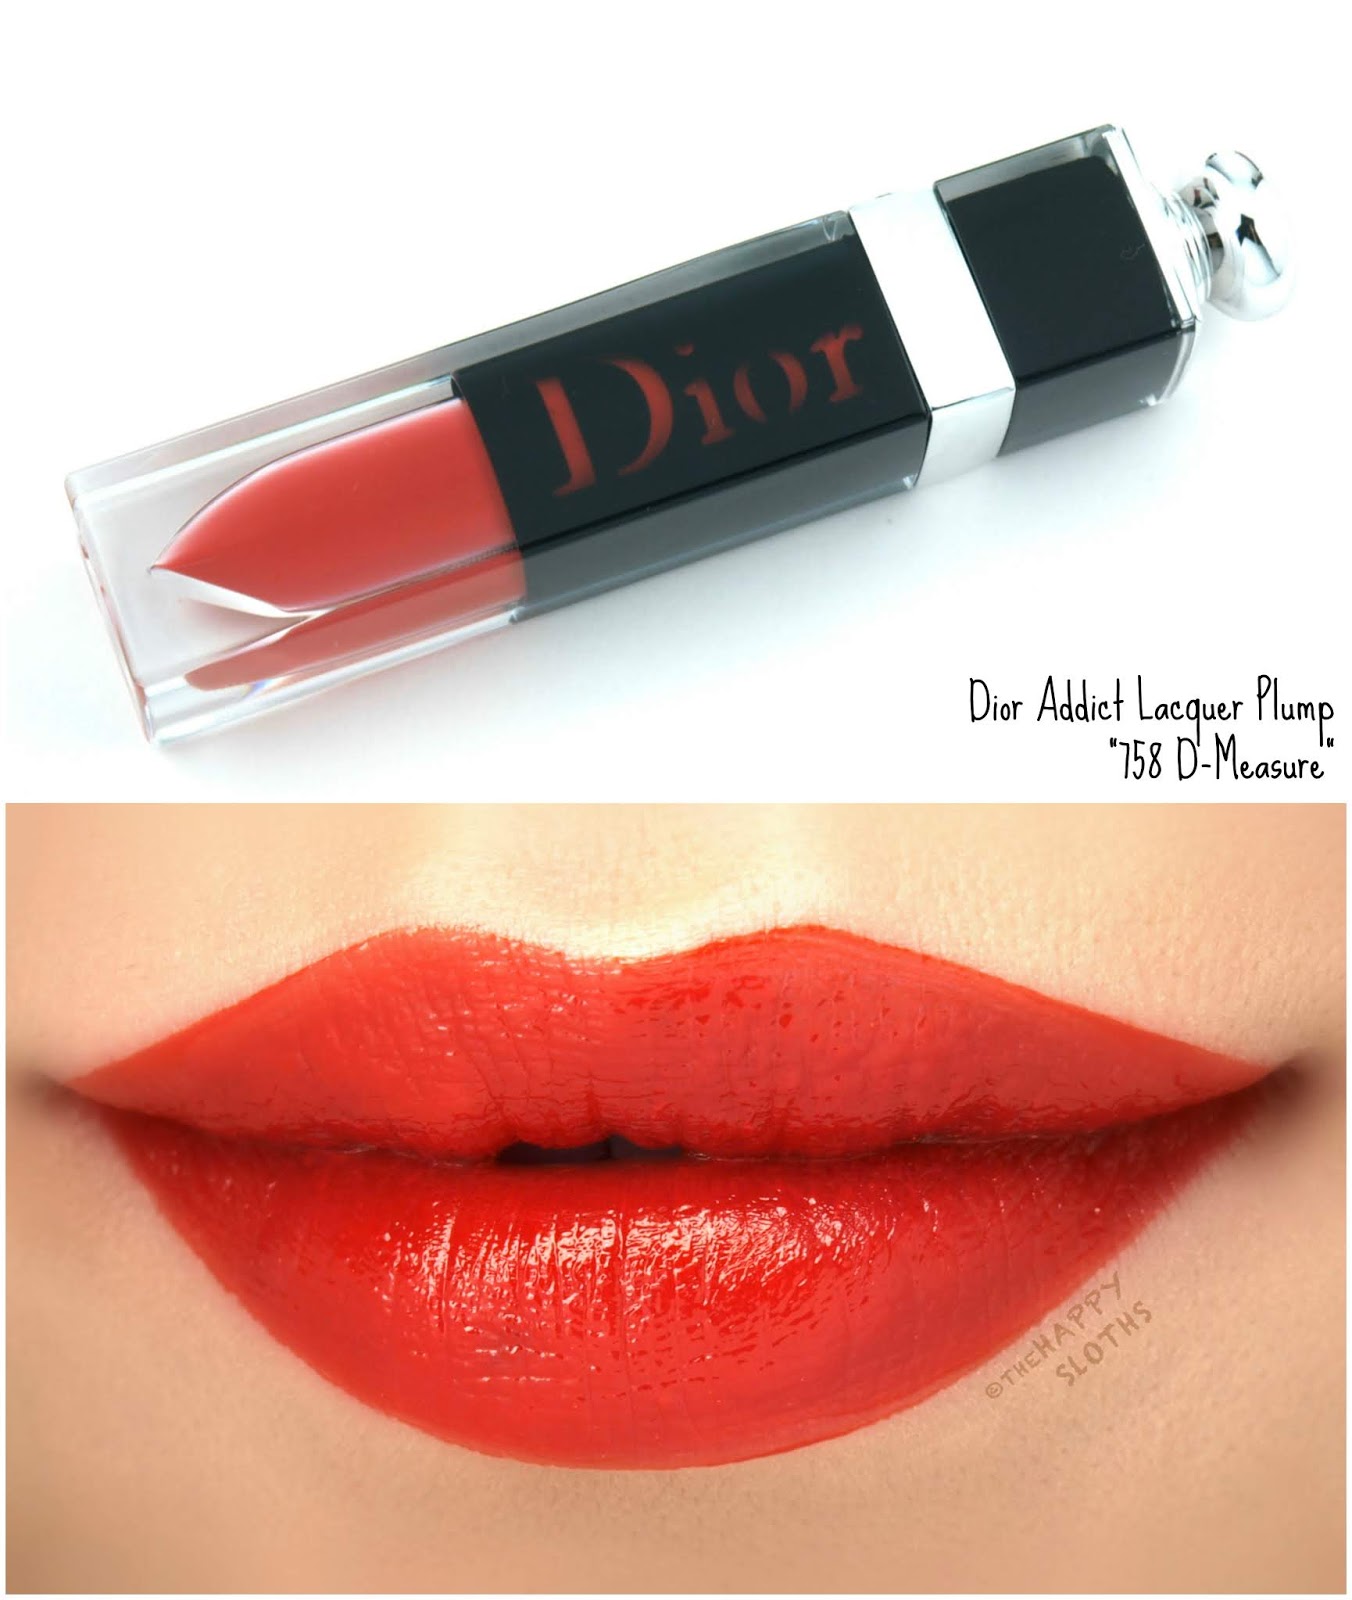 Dior | Dior Addict Lacquer Plump in "758 D-Measure": Review and Swatches